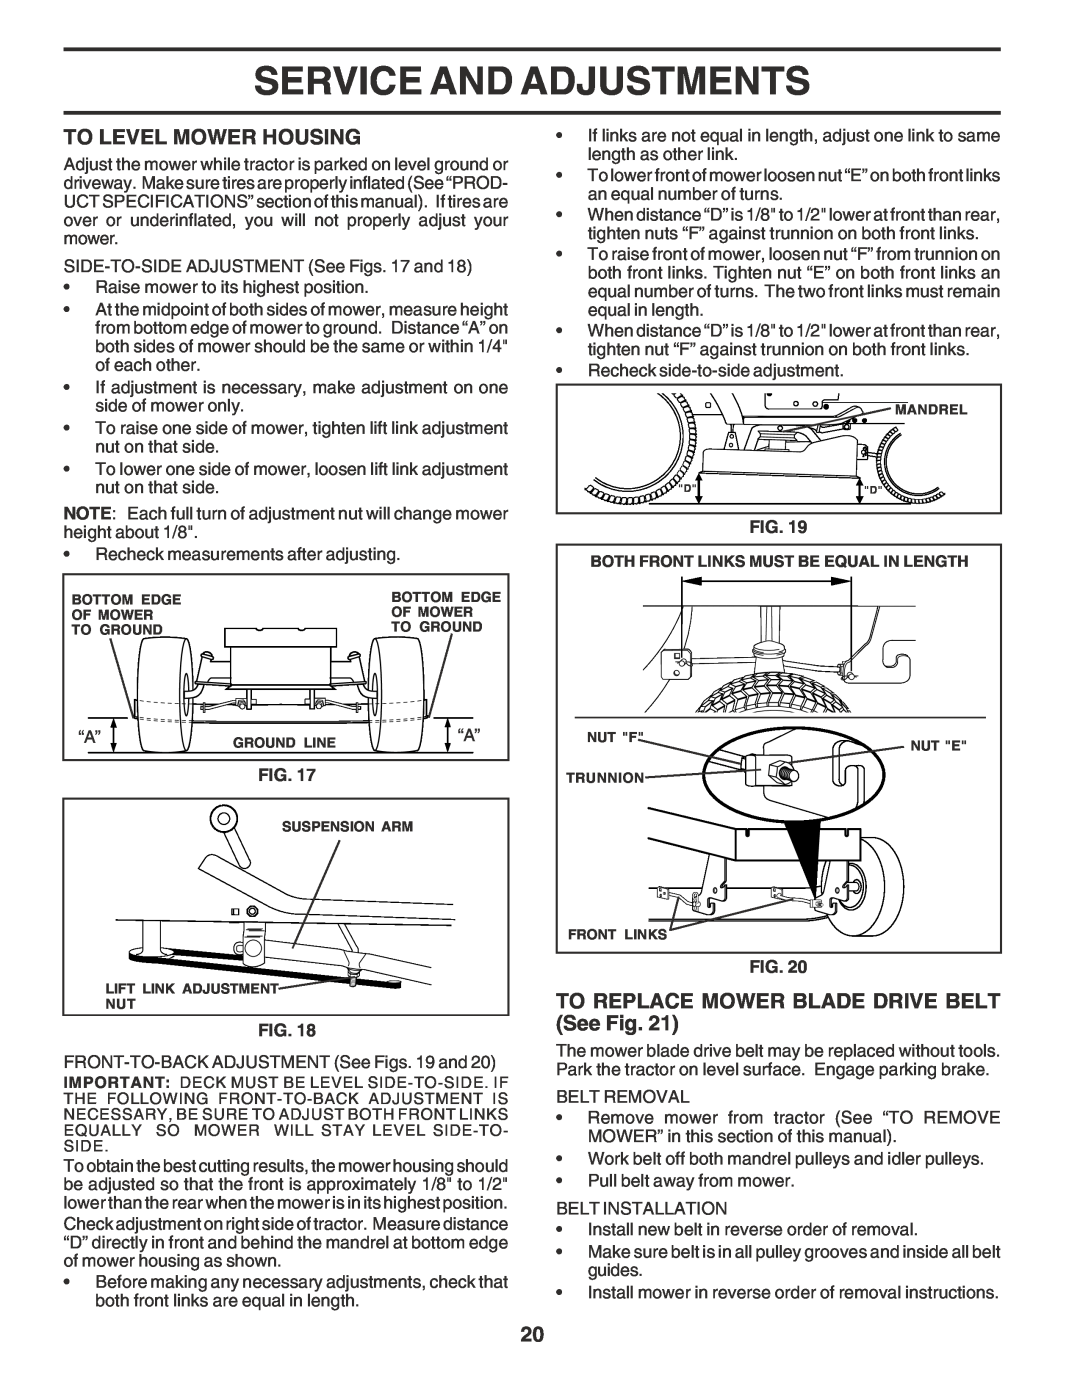 Poulan 183748 owner manual To Level Mower Housing, TO REPLACE MOWER BLADE DRIVE BELT See Fig, Service And Adjustments 